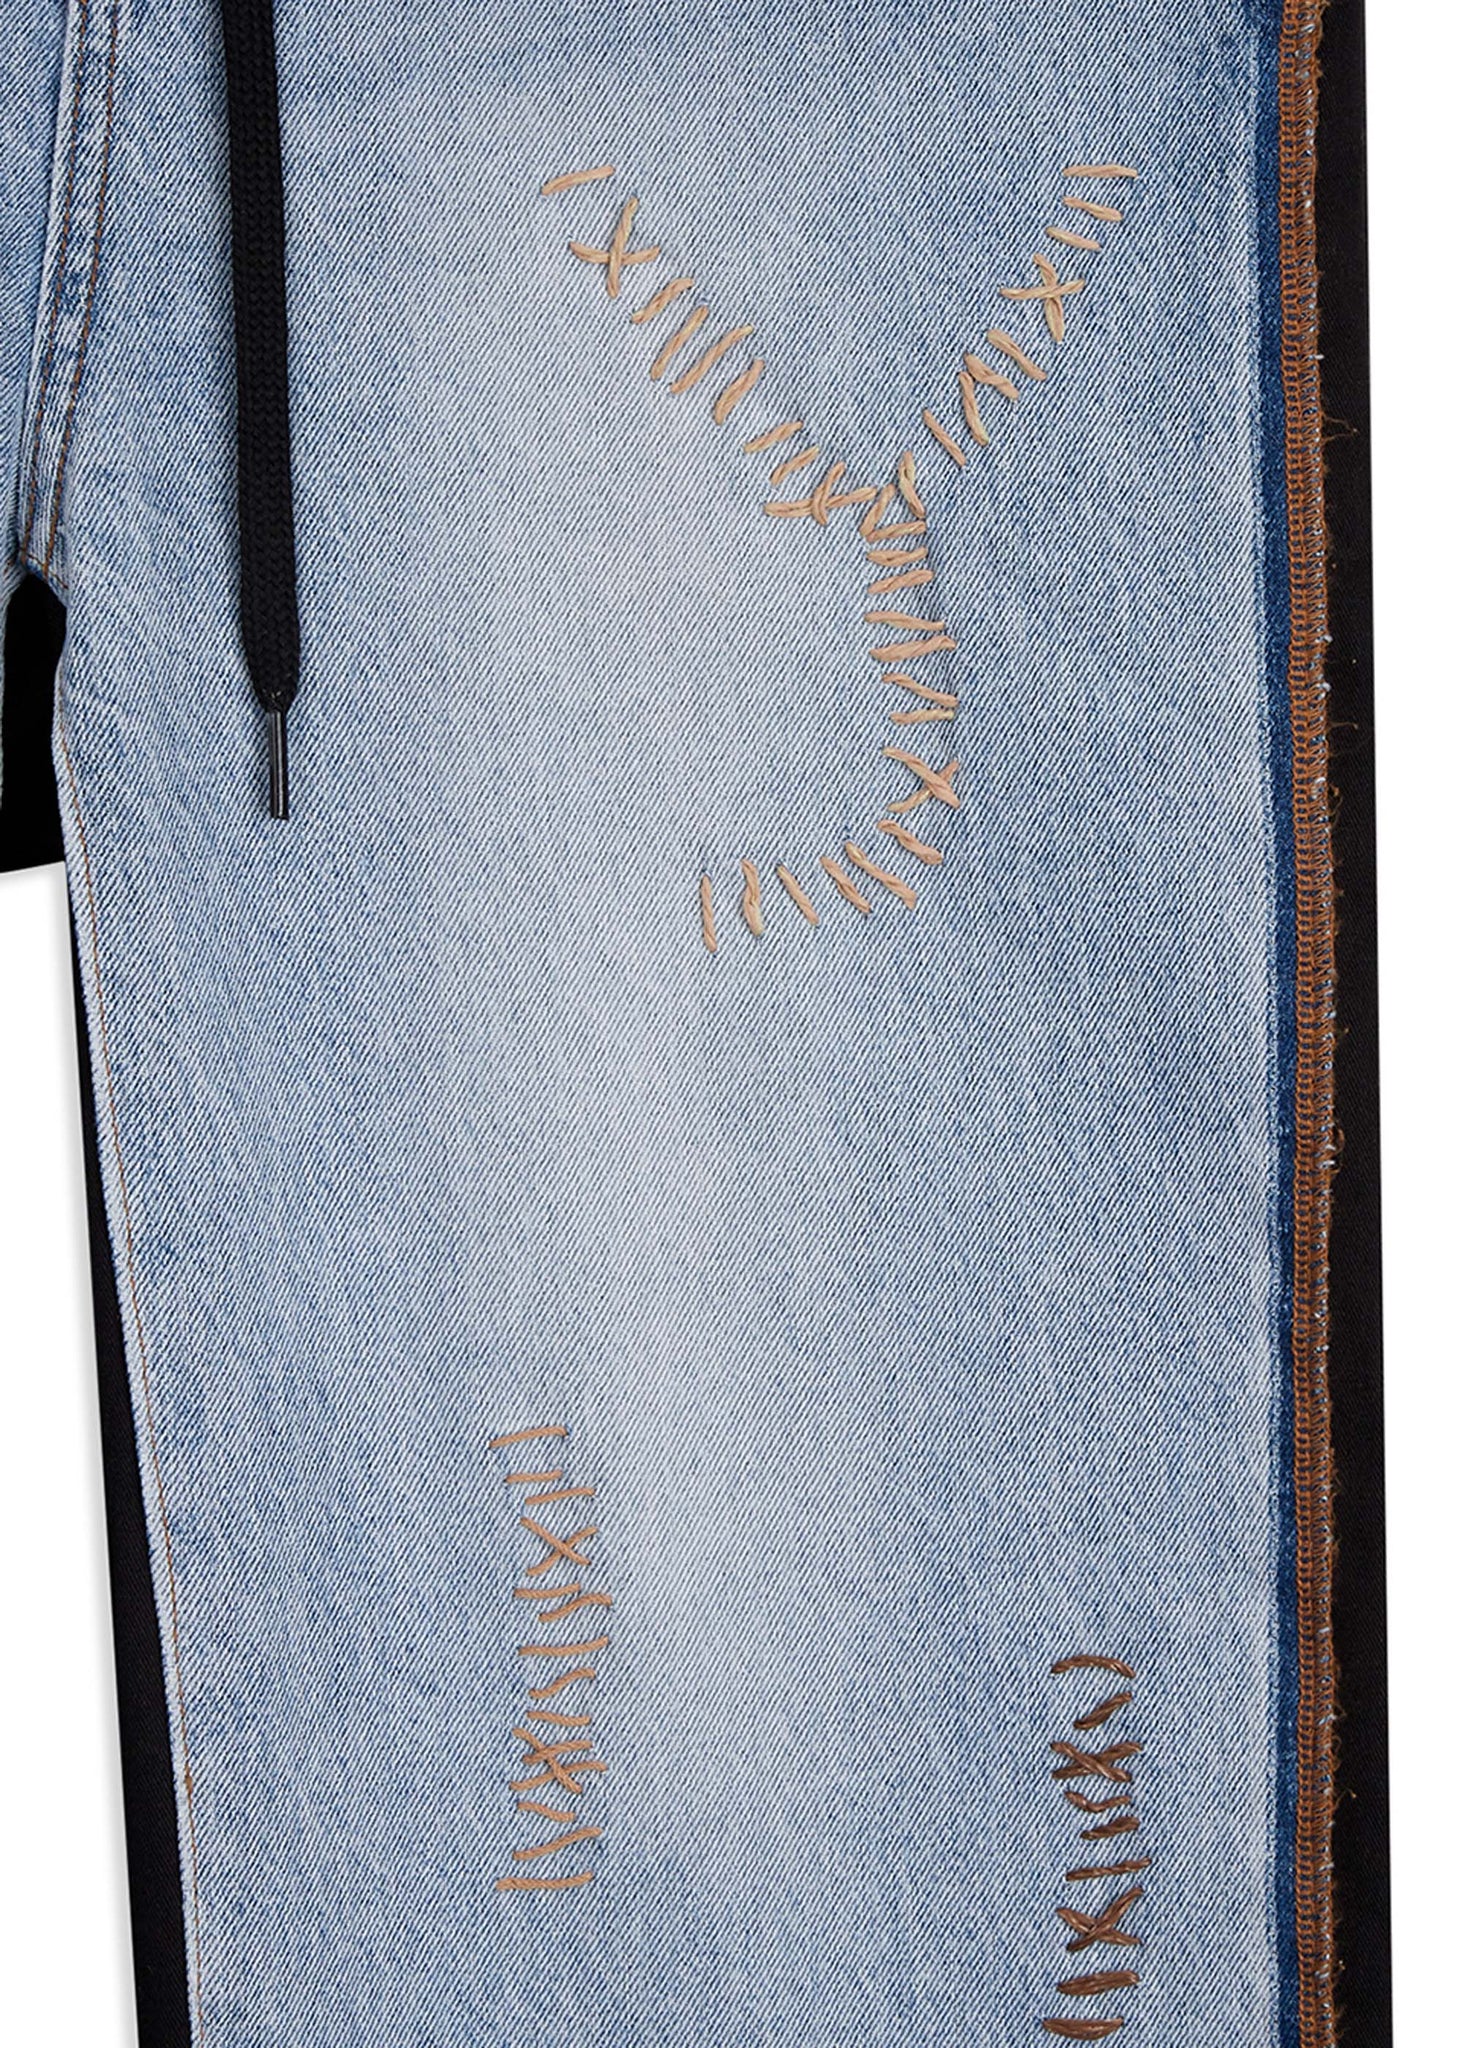 Blue and Black Combination Jeans